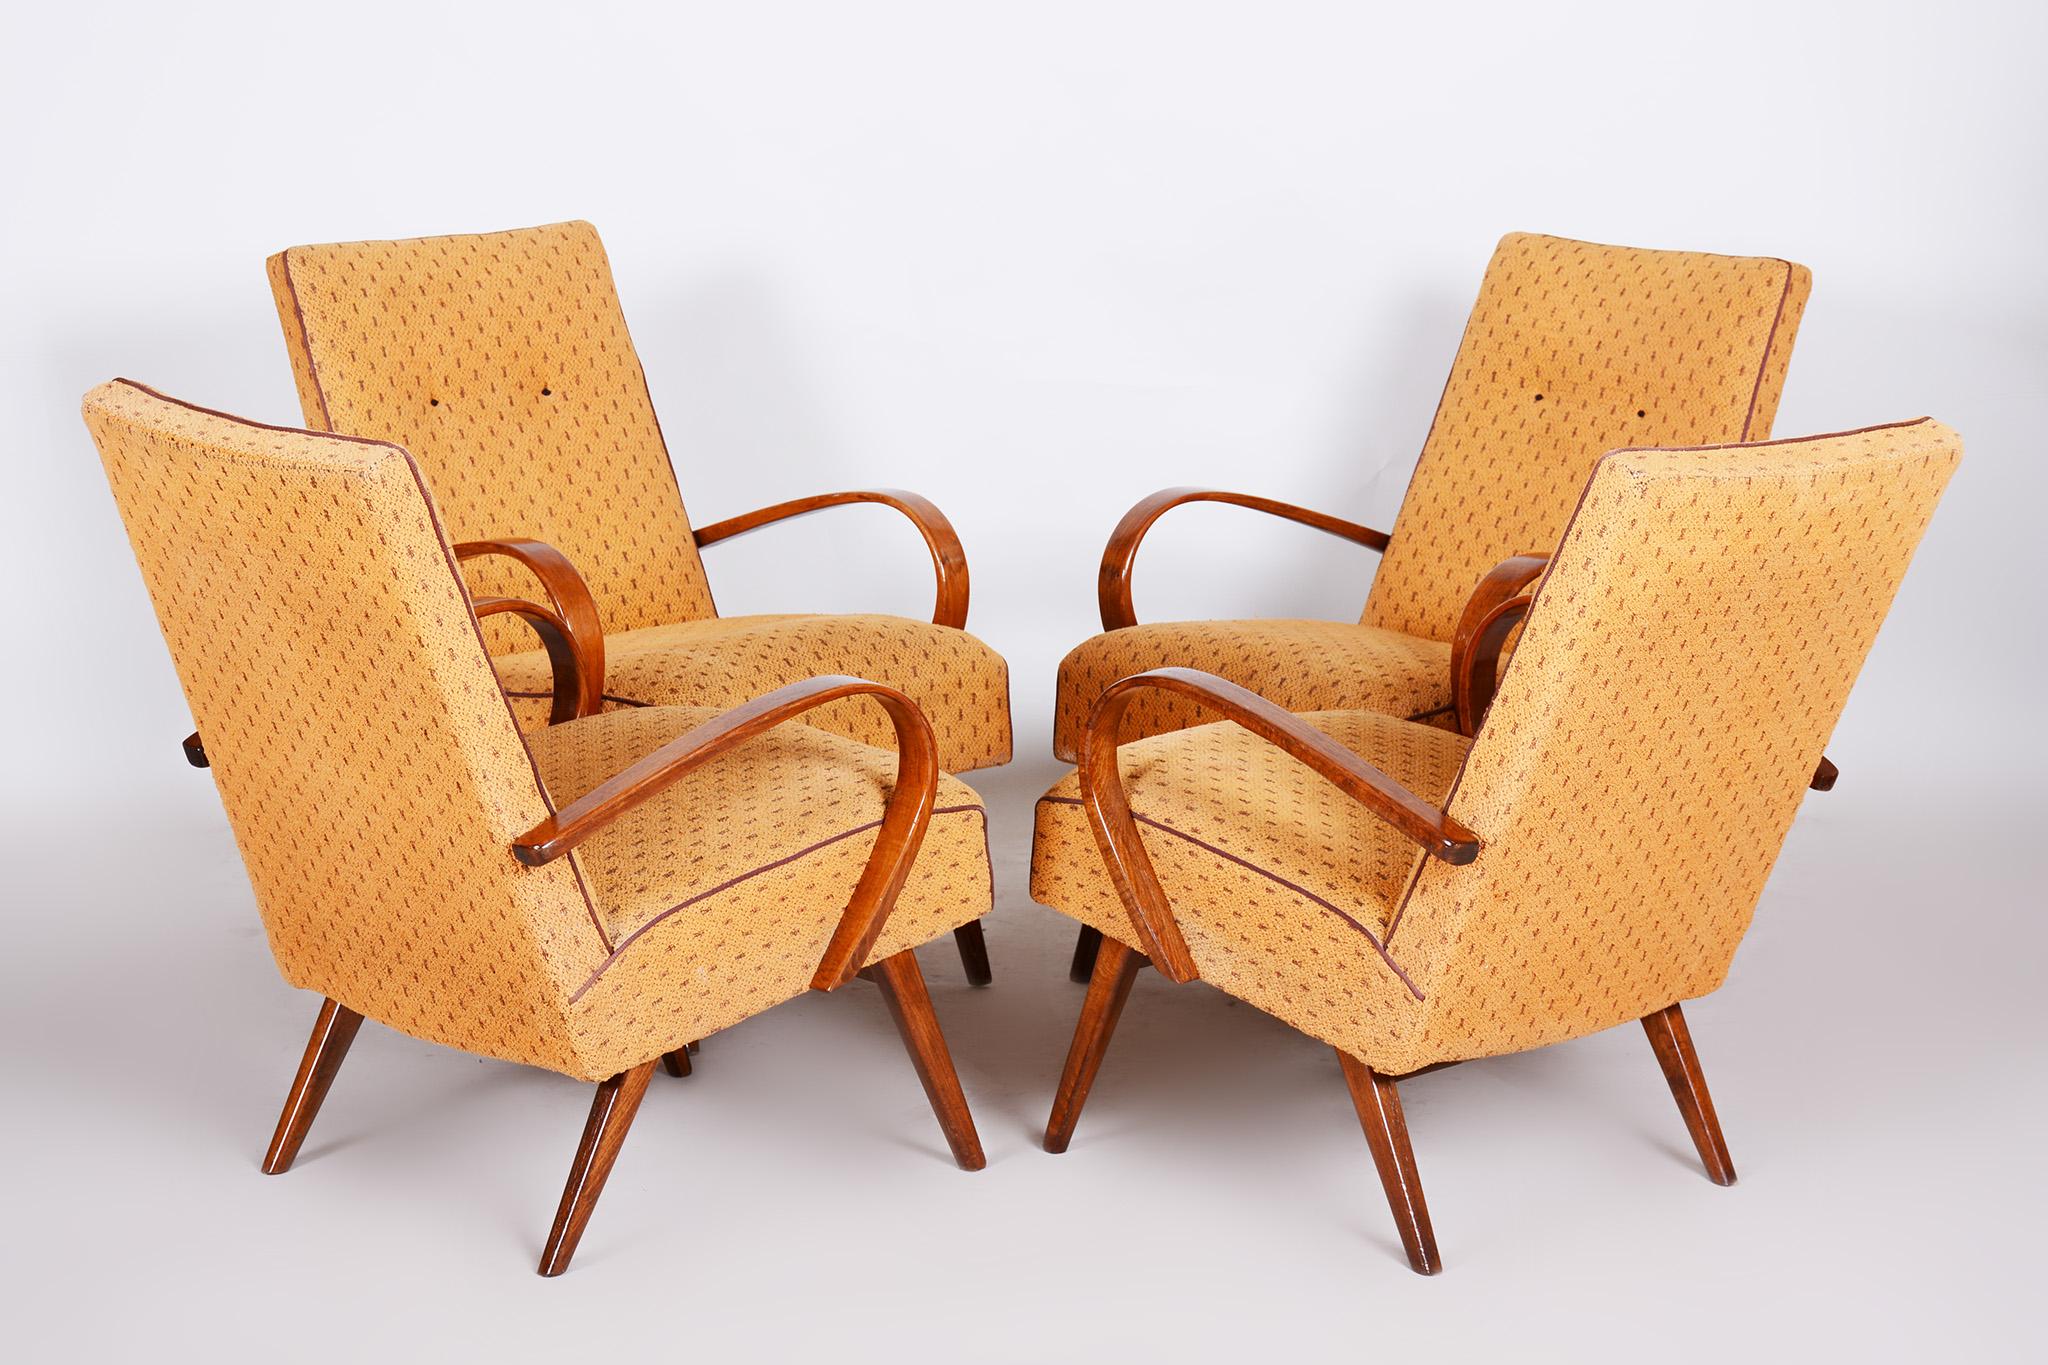 Four Yellow Mid Century Armchairs Made in 1950s Czechia, Original Condition For Sale 7